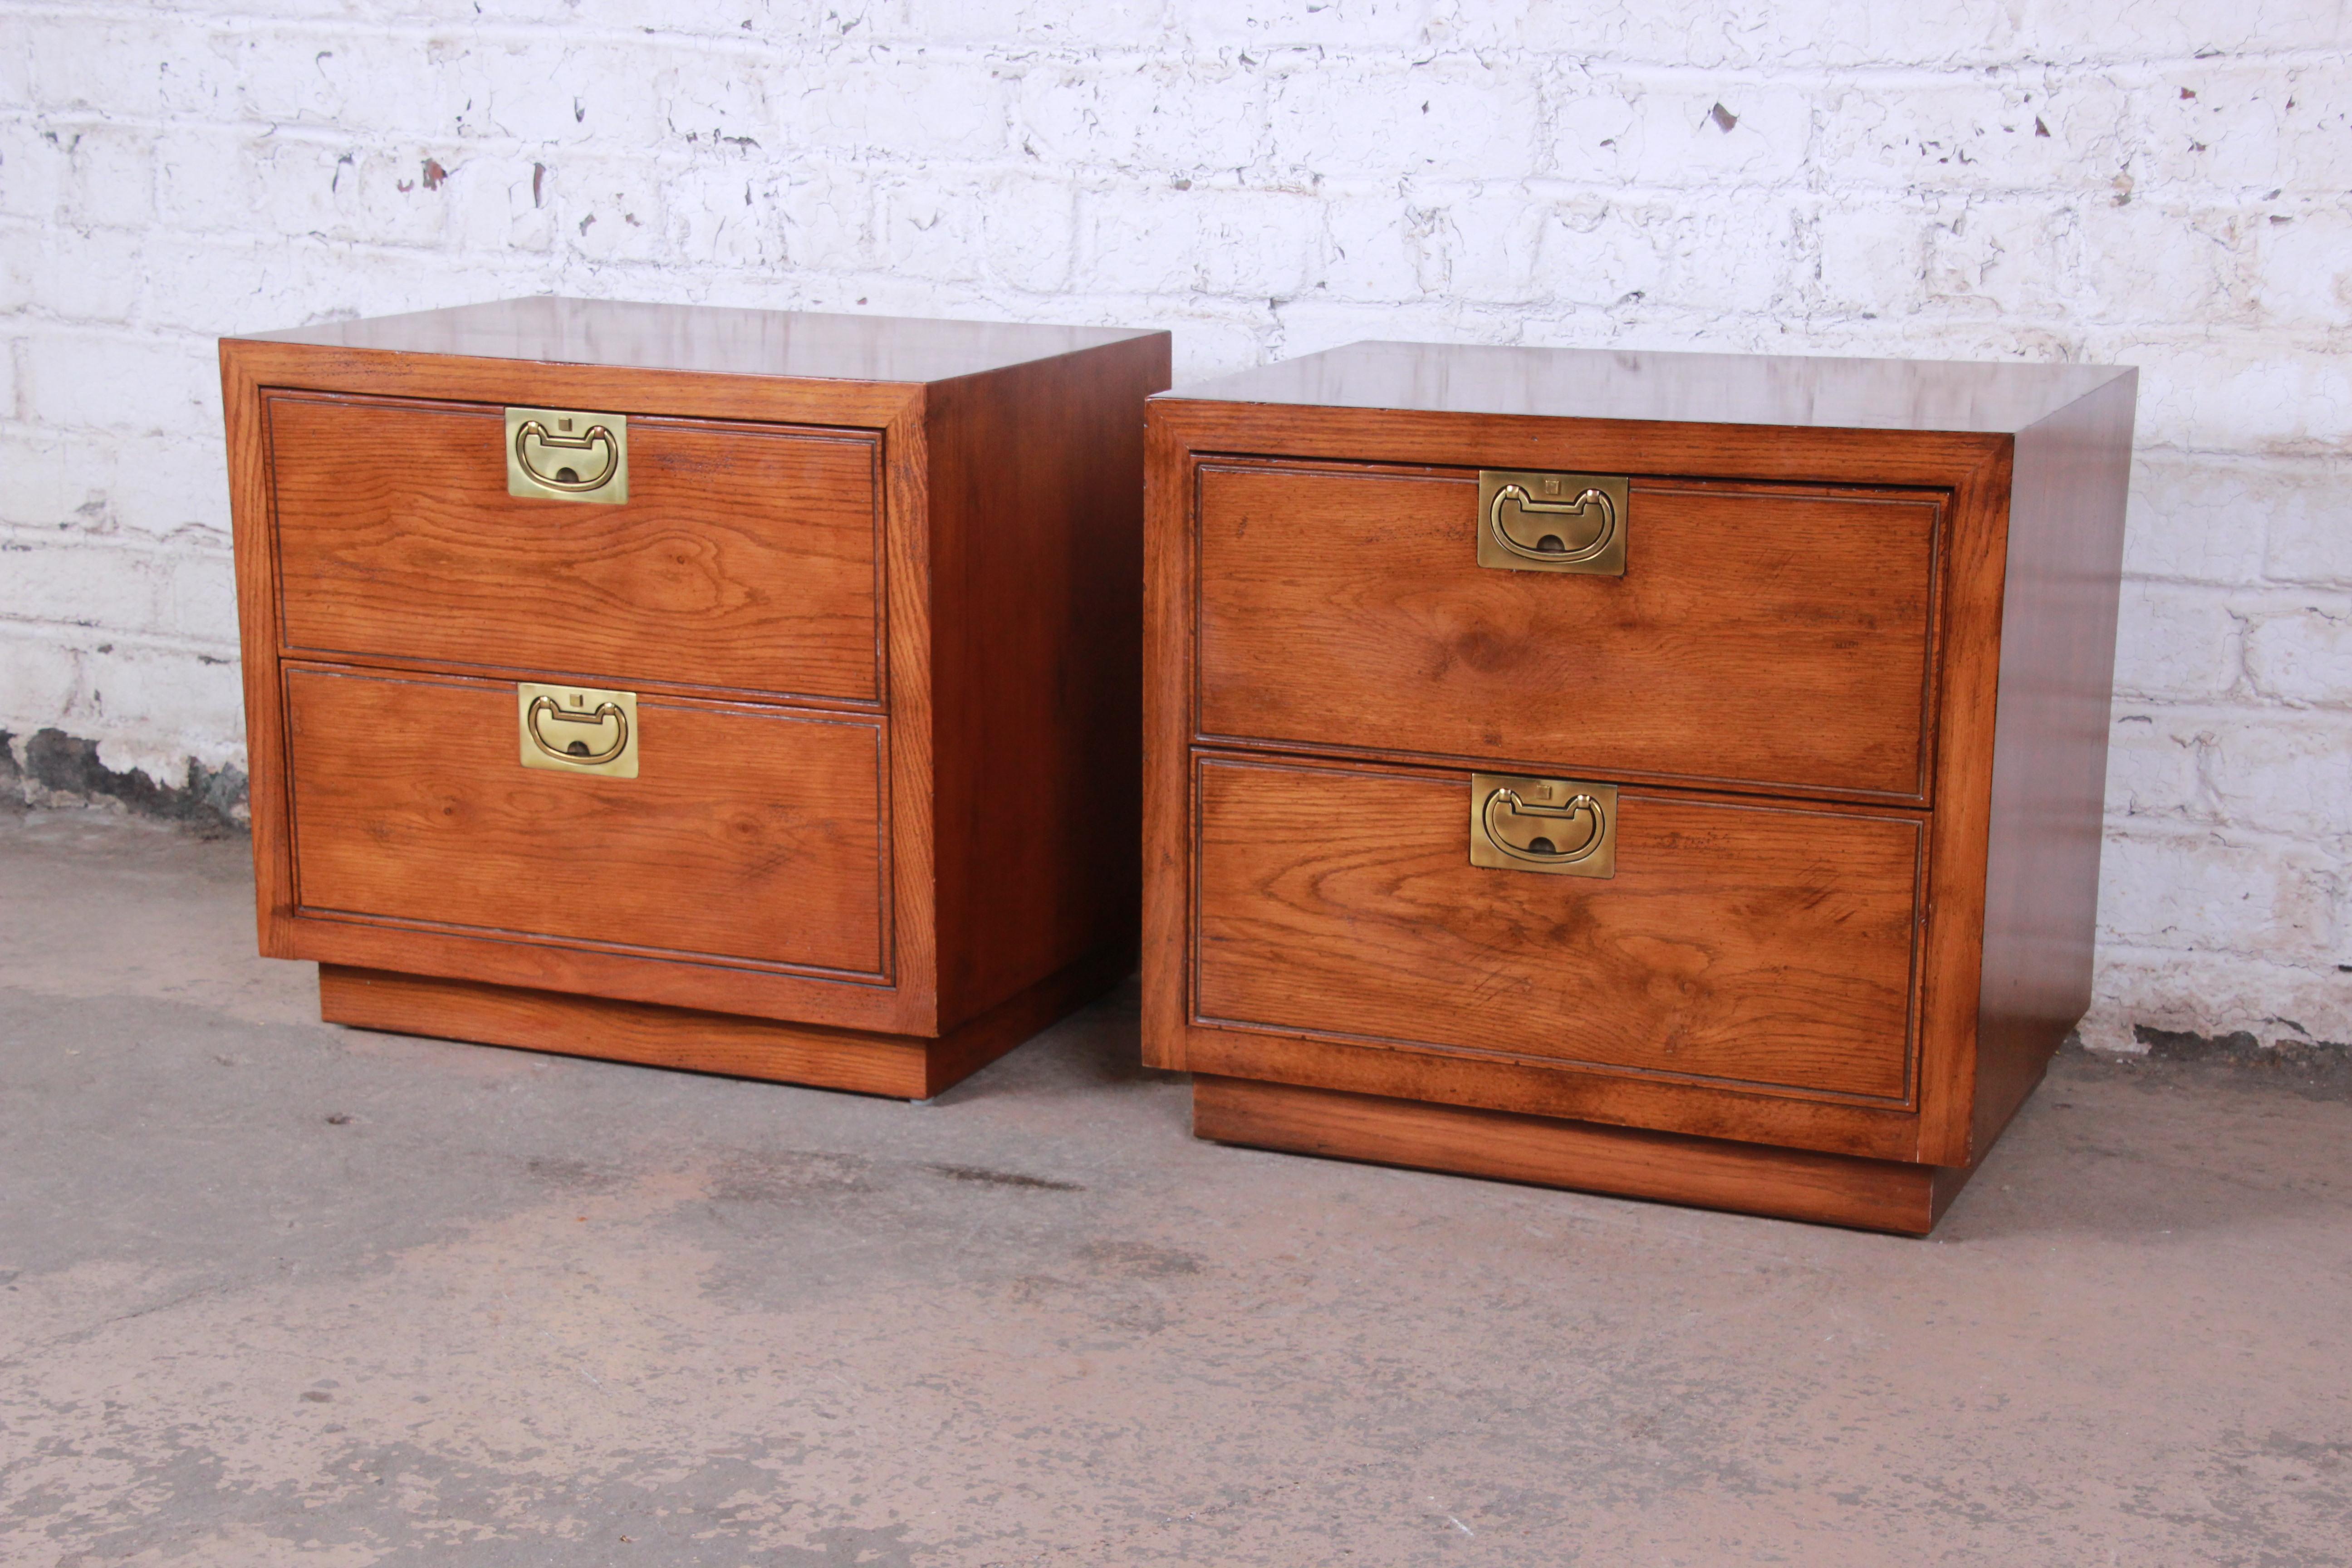 Offering a very nice pair of Henredon Campaign style oak nightstands from the Bel Air line. The nightstands have nice brass pulls with two large drawers for storage on each stand. They offer a beautiful oakwood grain and are in great vintage